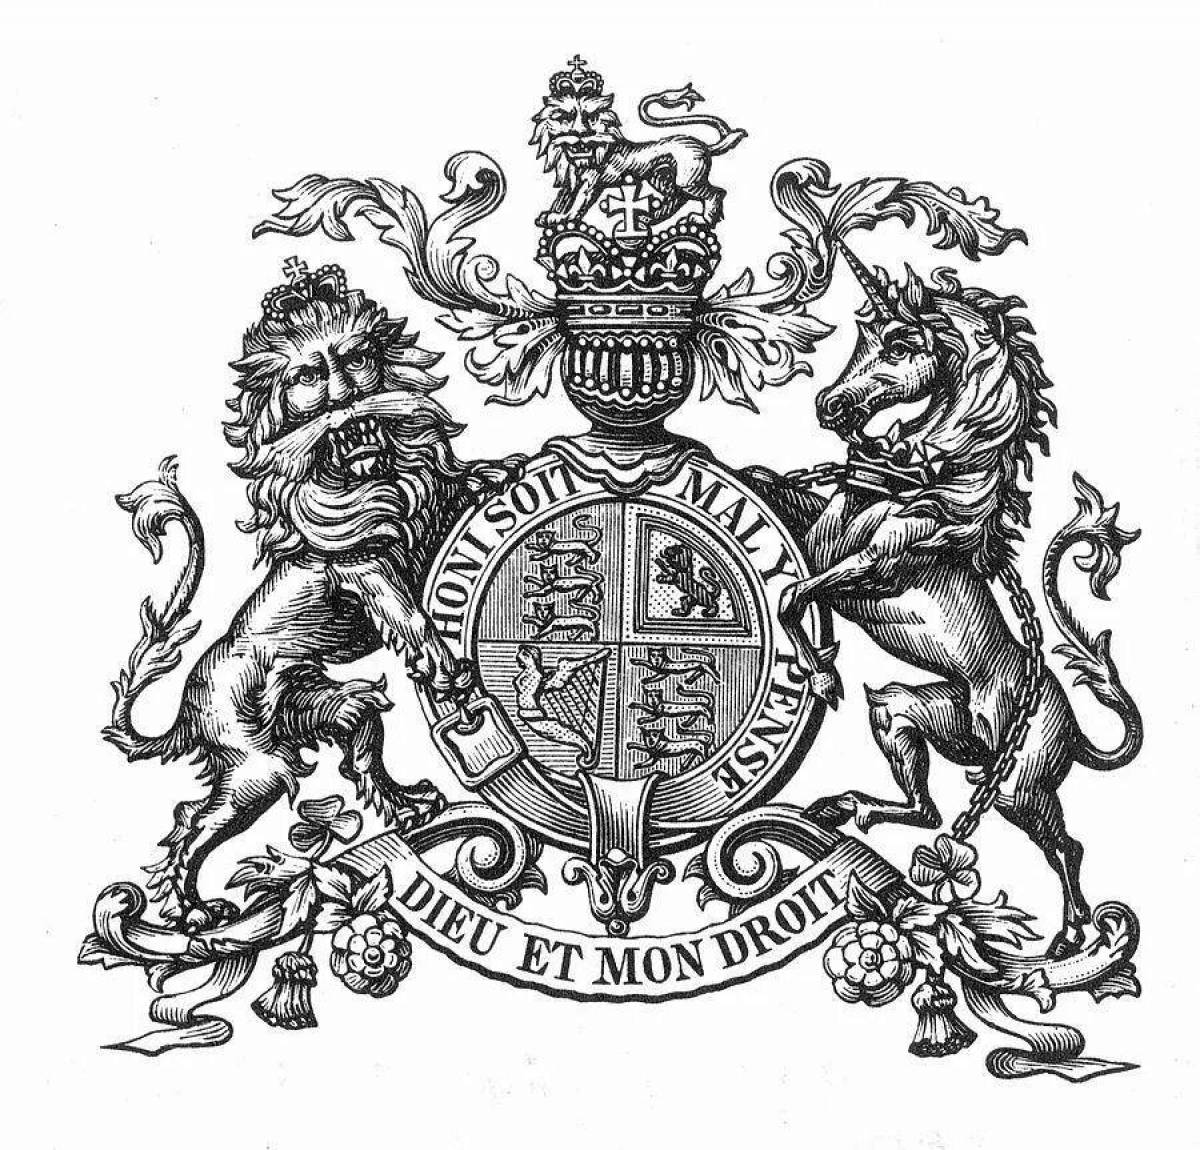 The famous coat of arms of Great Britain